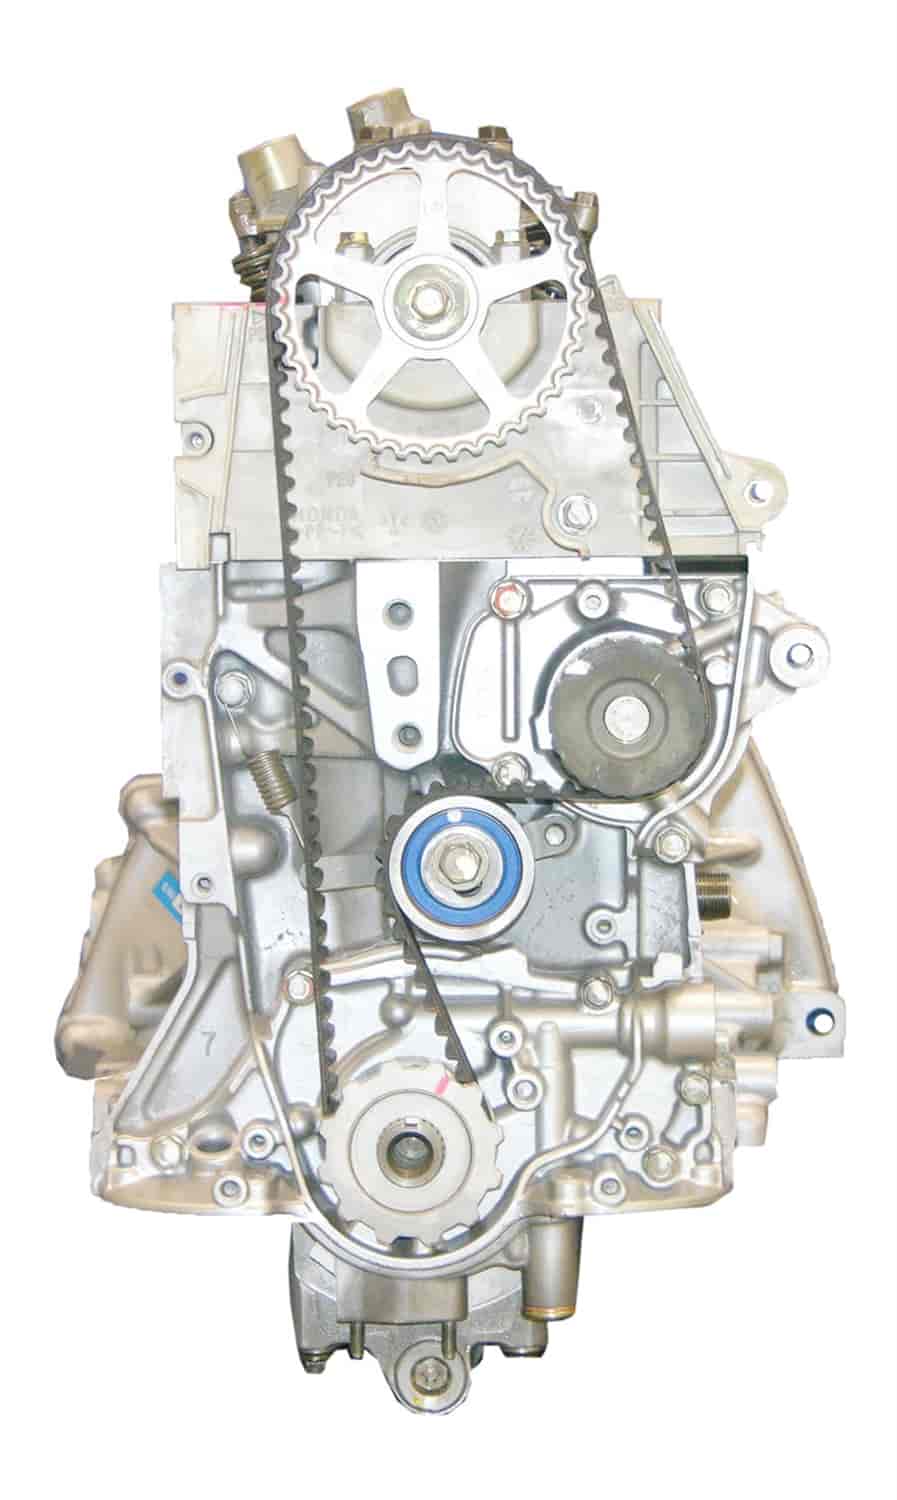 Remanufactured Crate Engine for 1999-2000 Honda Civic with 1.6L L4 D16Y8